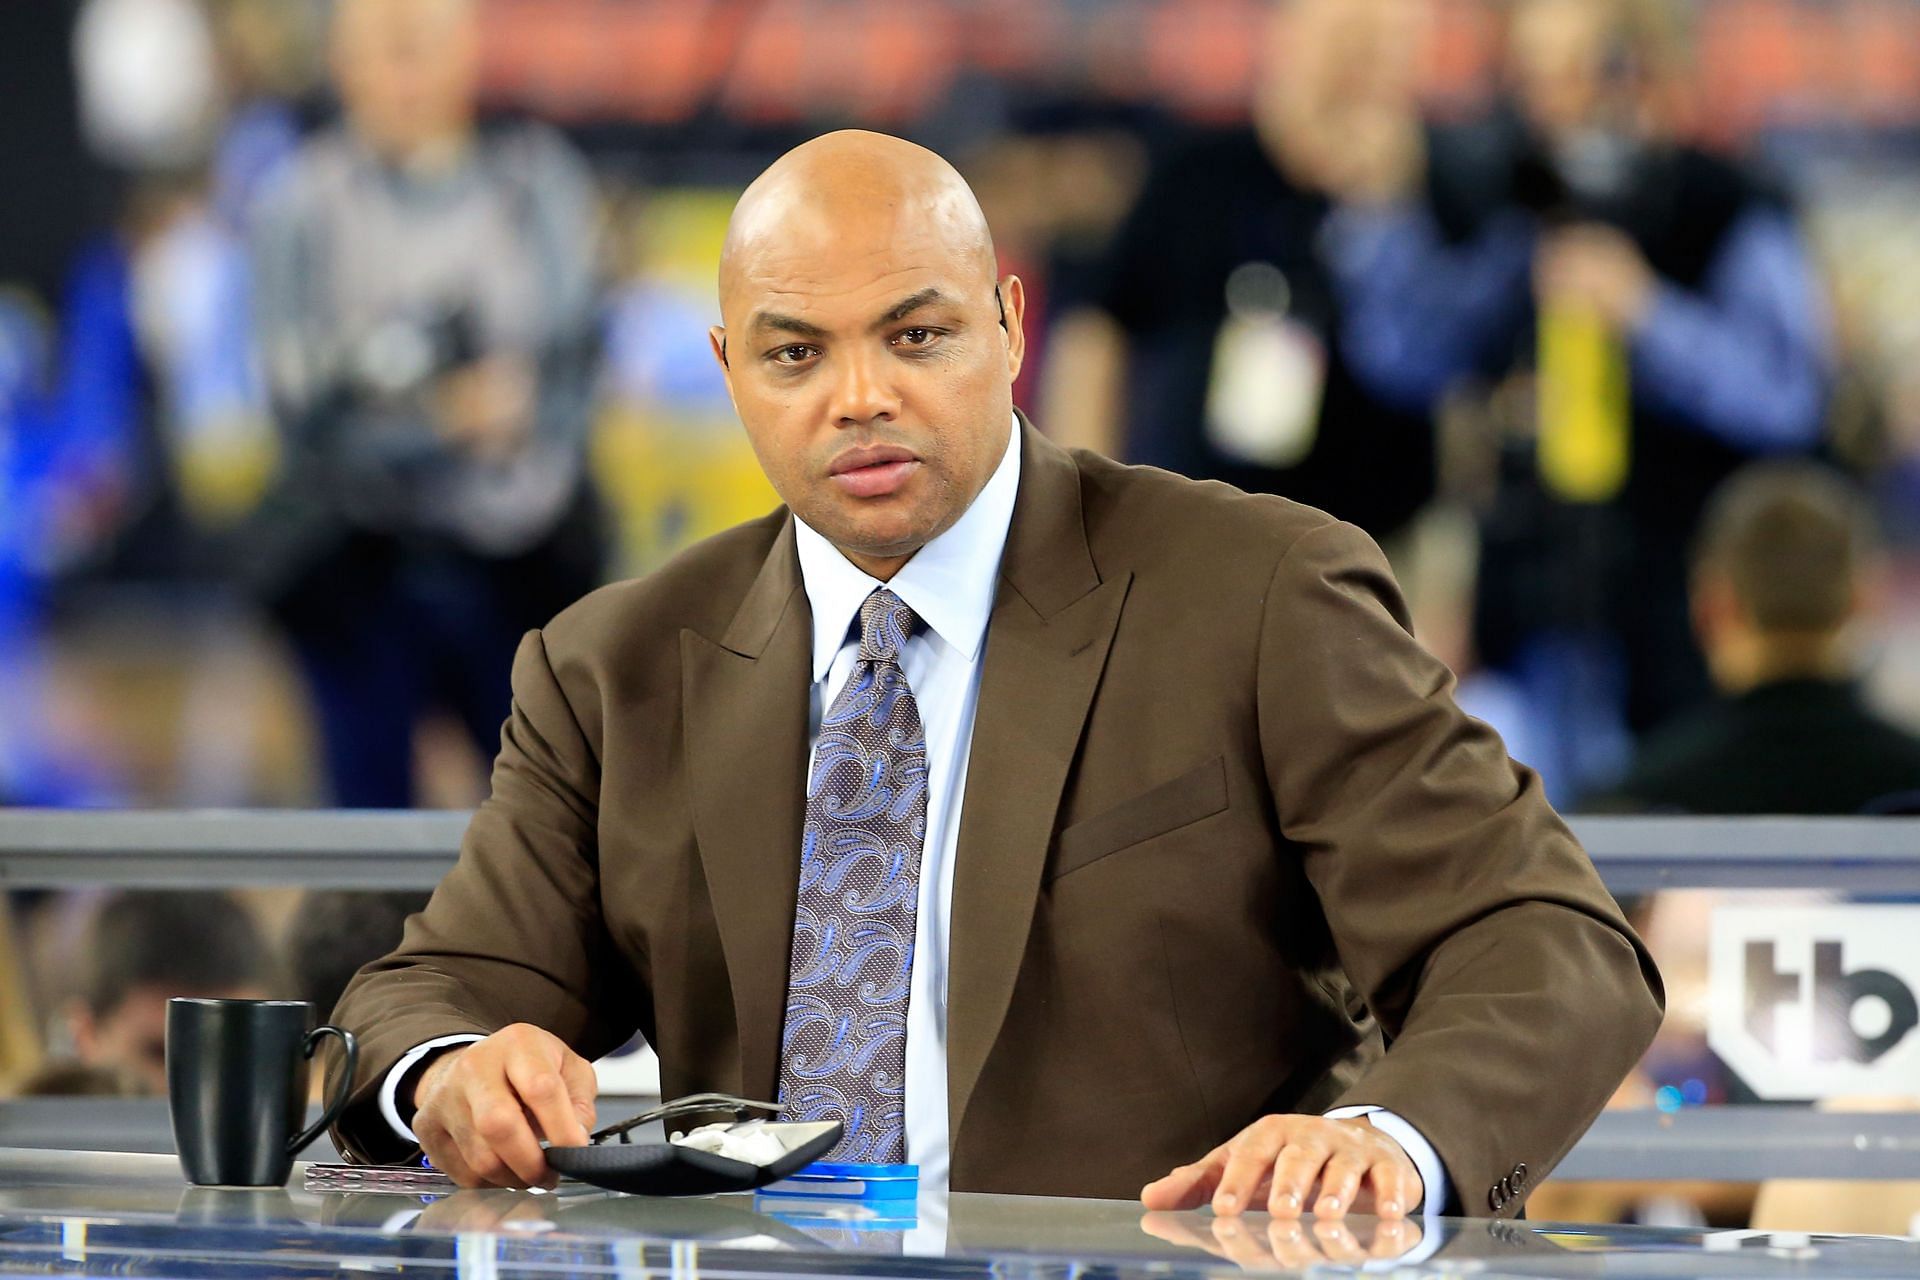 Charles Barkley offers commentary for an NCAA game